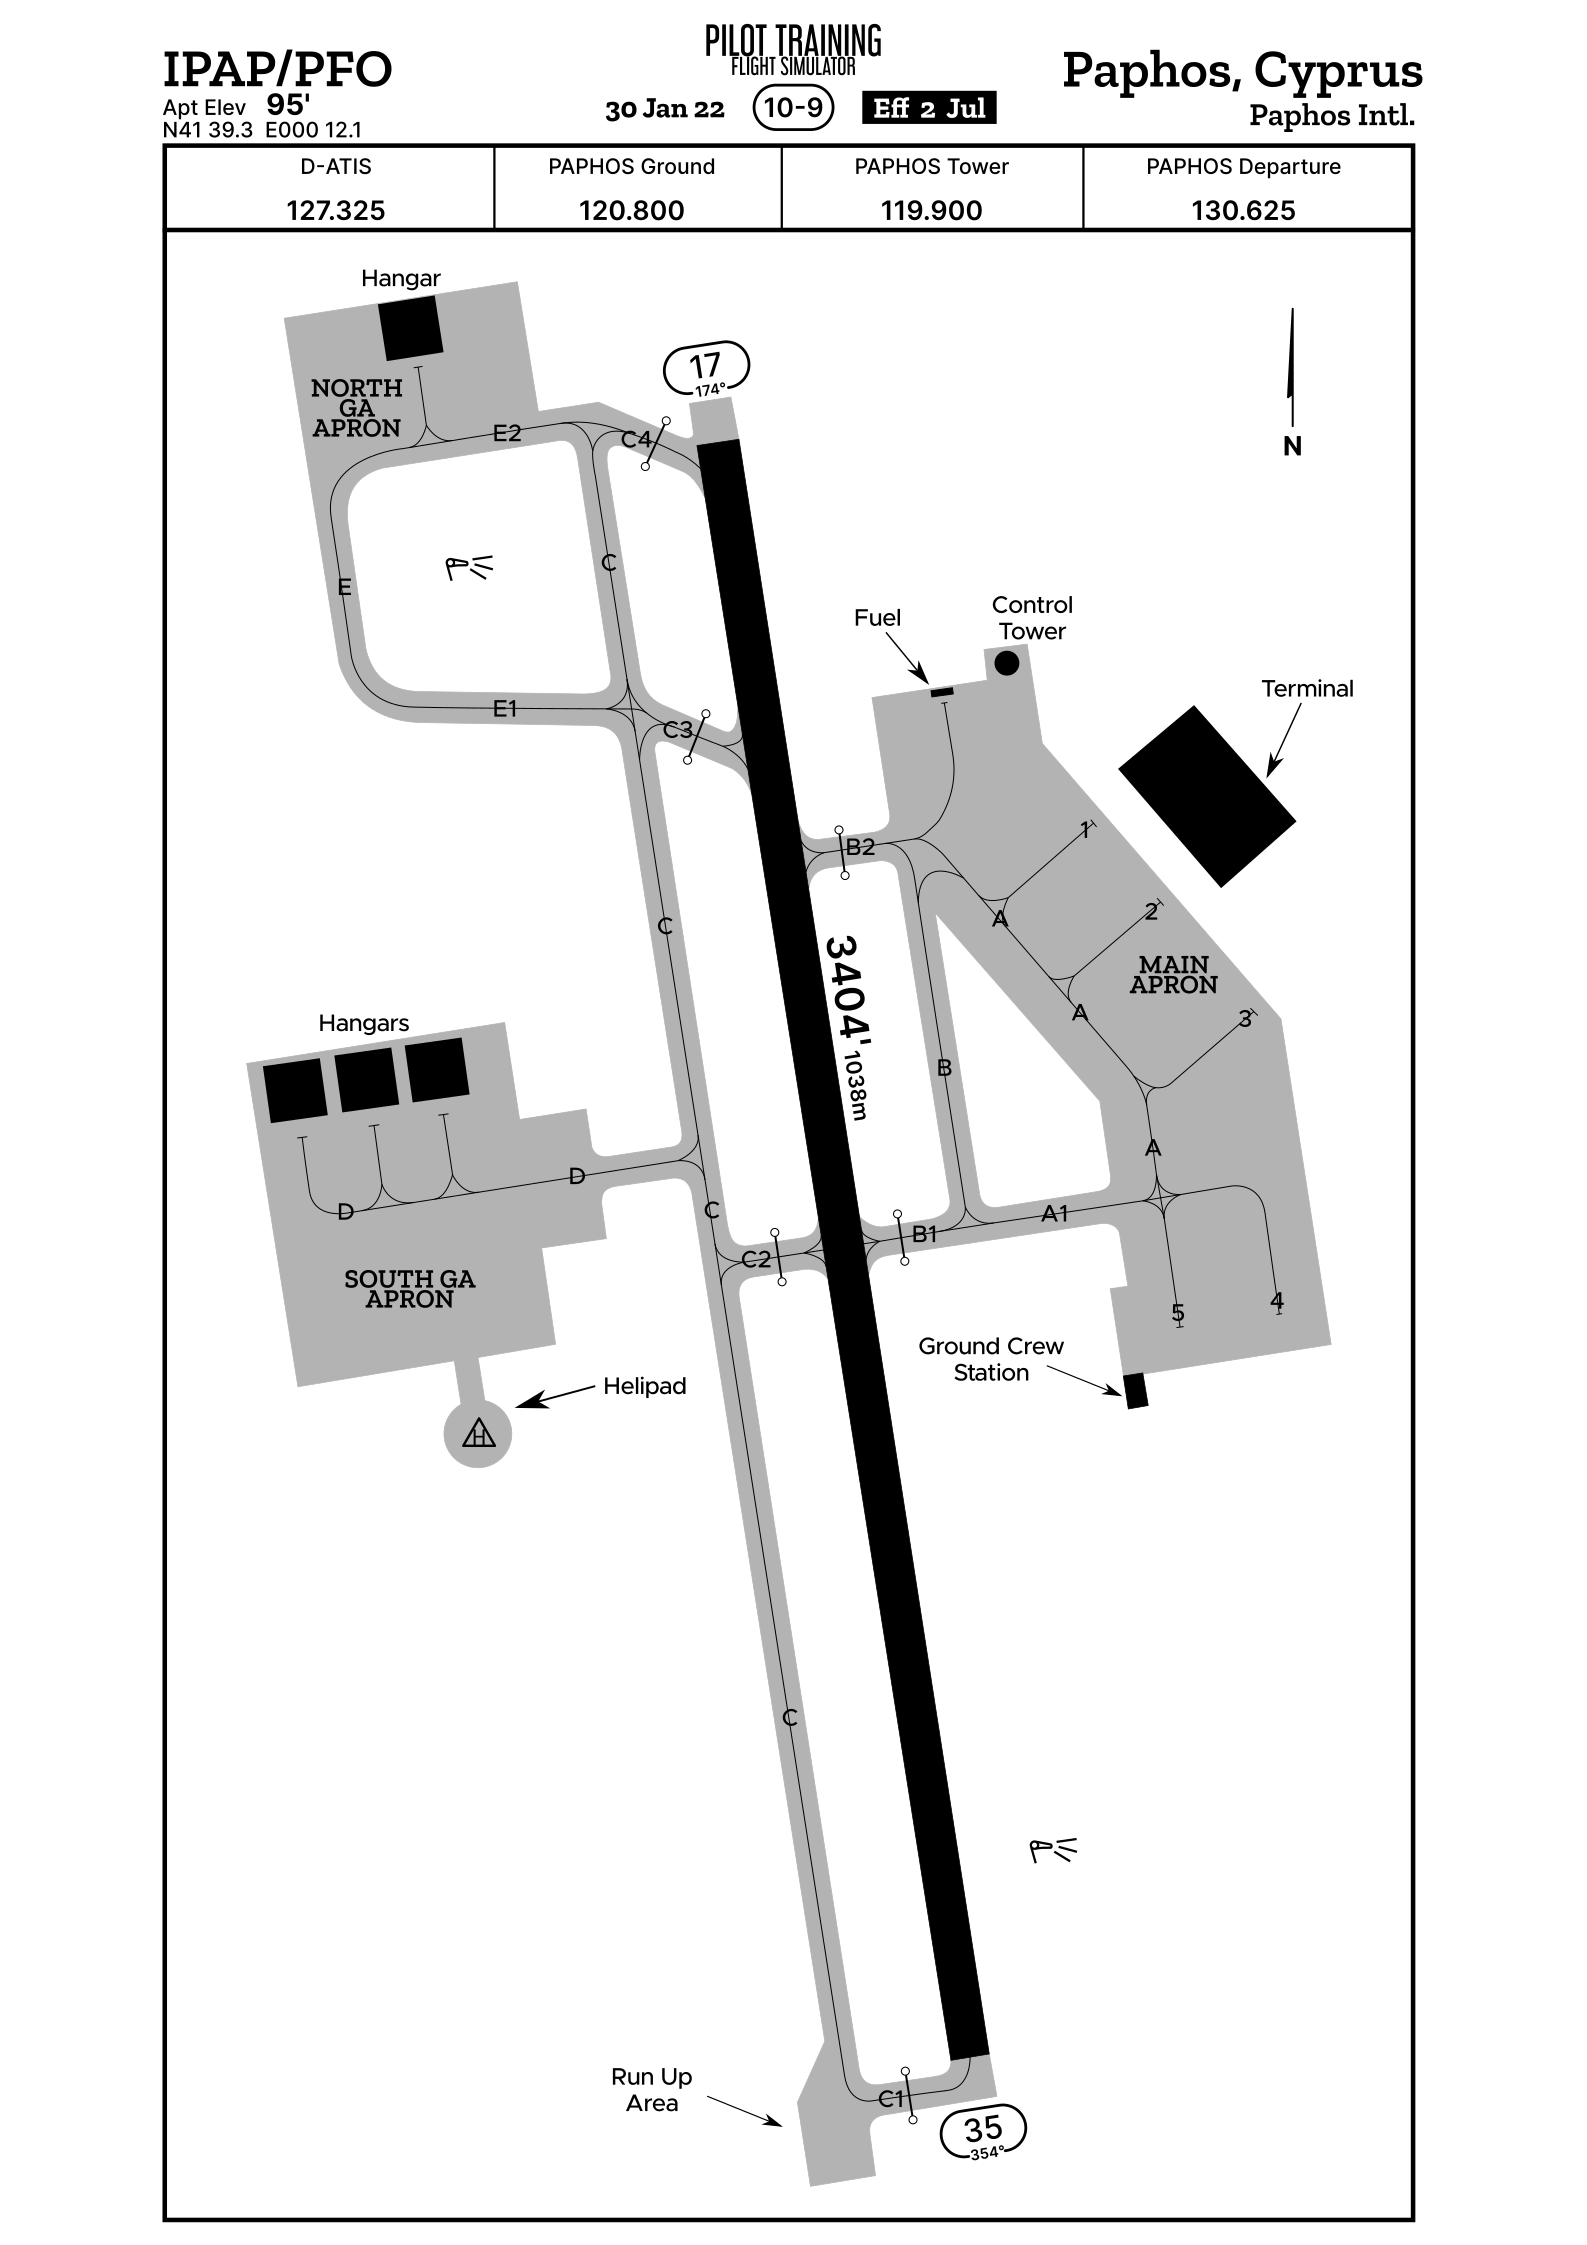 Airport ground chart for the airport IPAP